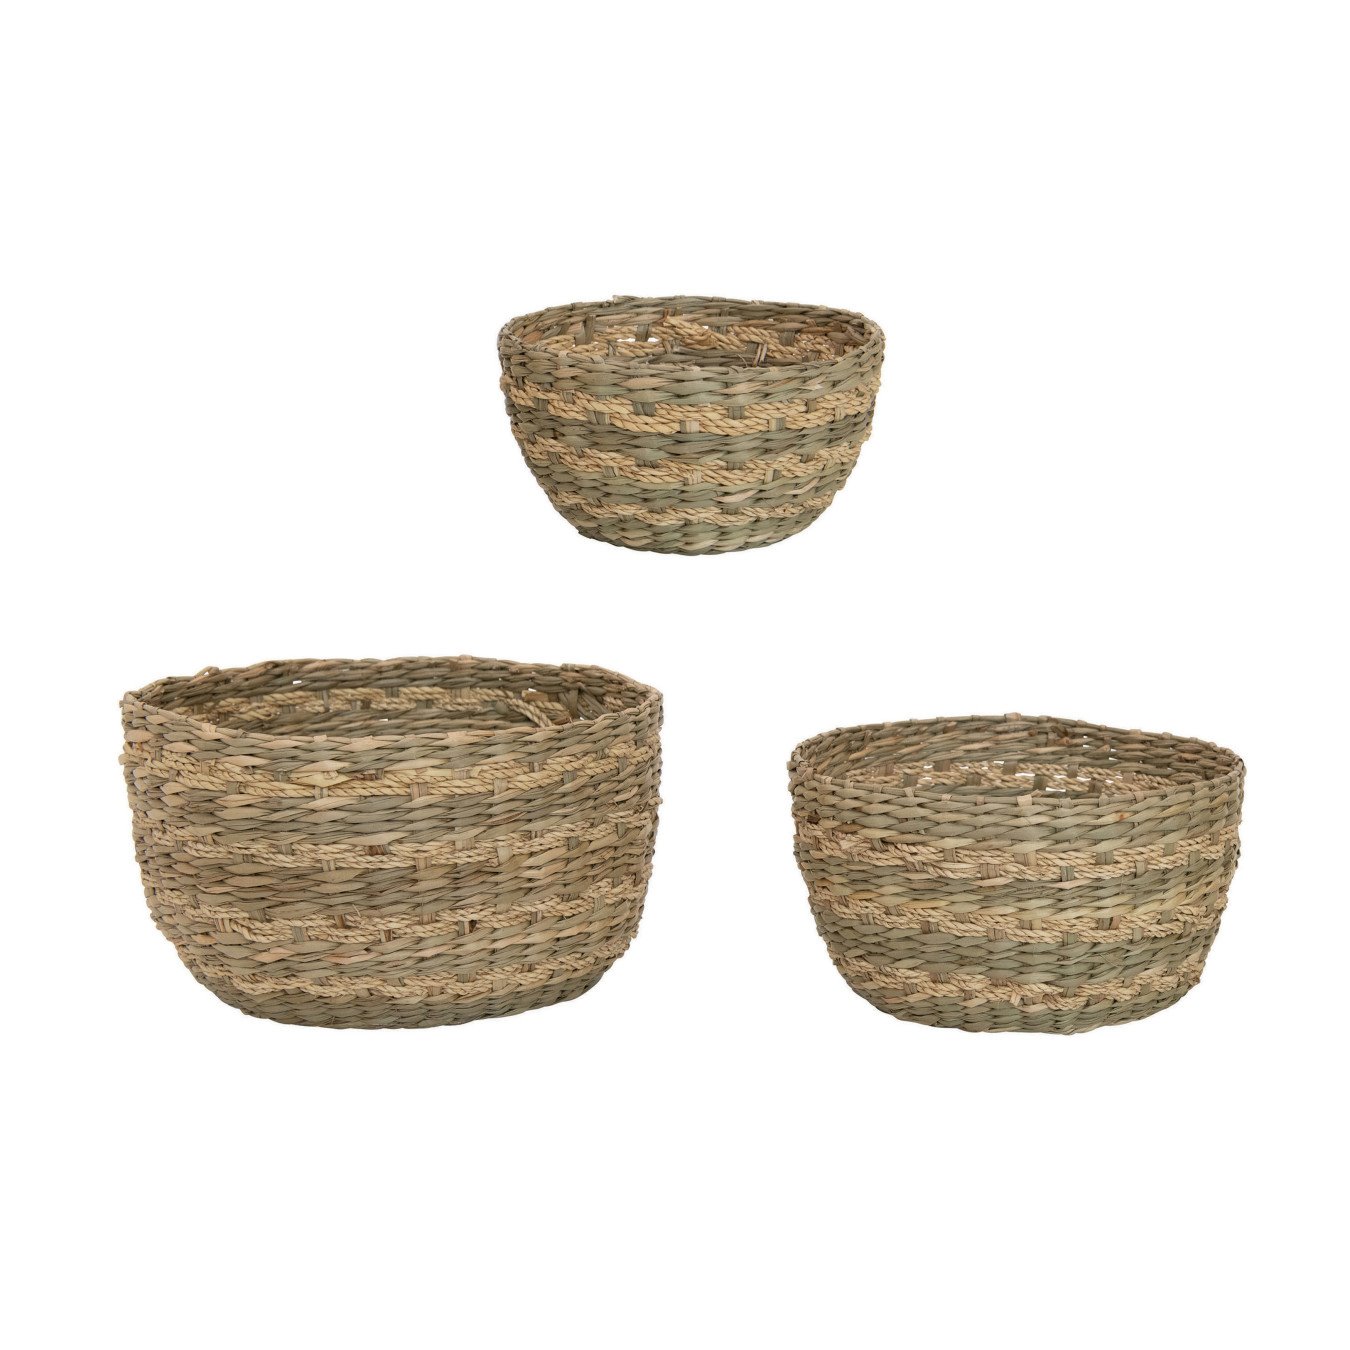 Seagrass Baskets, Natural, Set of 3